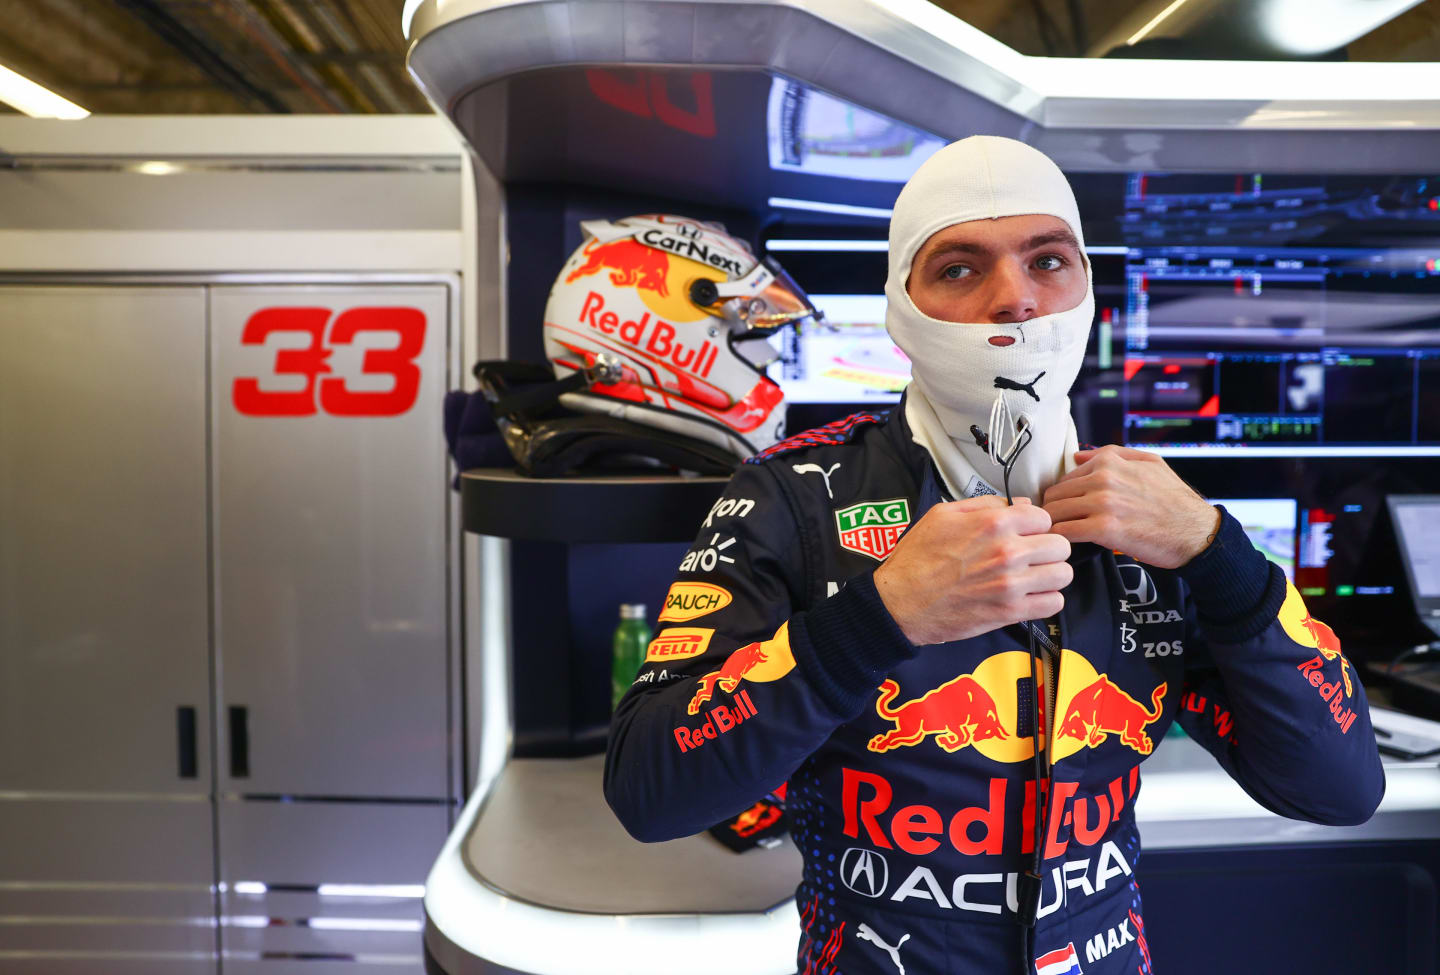 AUSTIN, TEXAS - OCTOBER 22: Max Verstappen of Netherlands and Red Bull Racing prepares to drive in